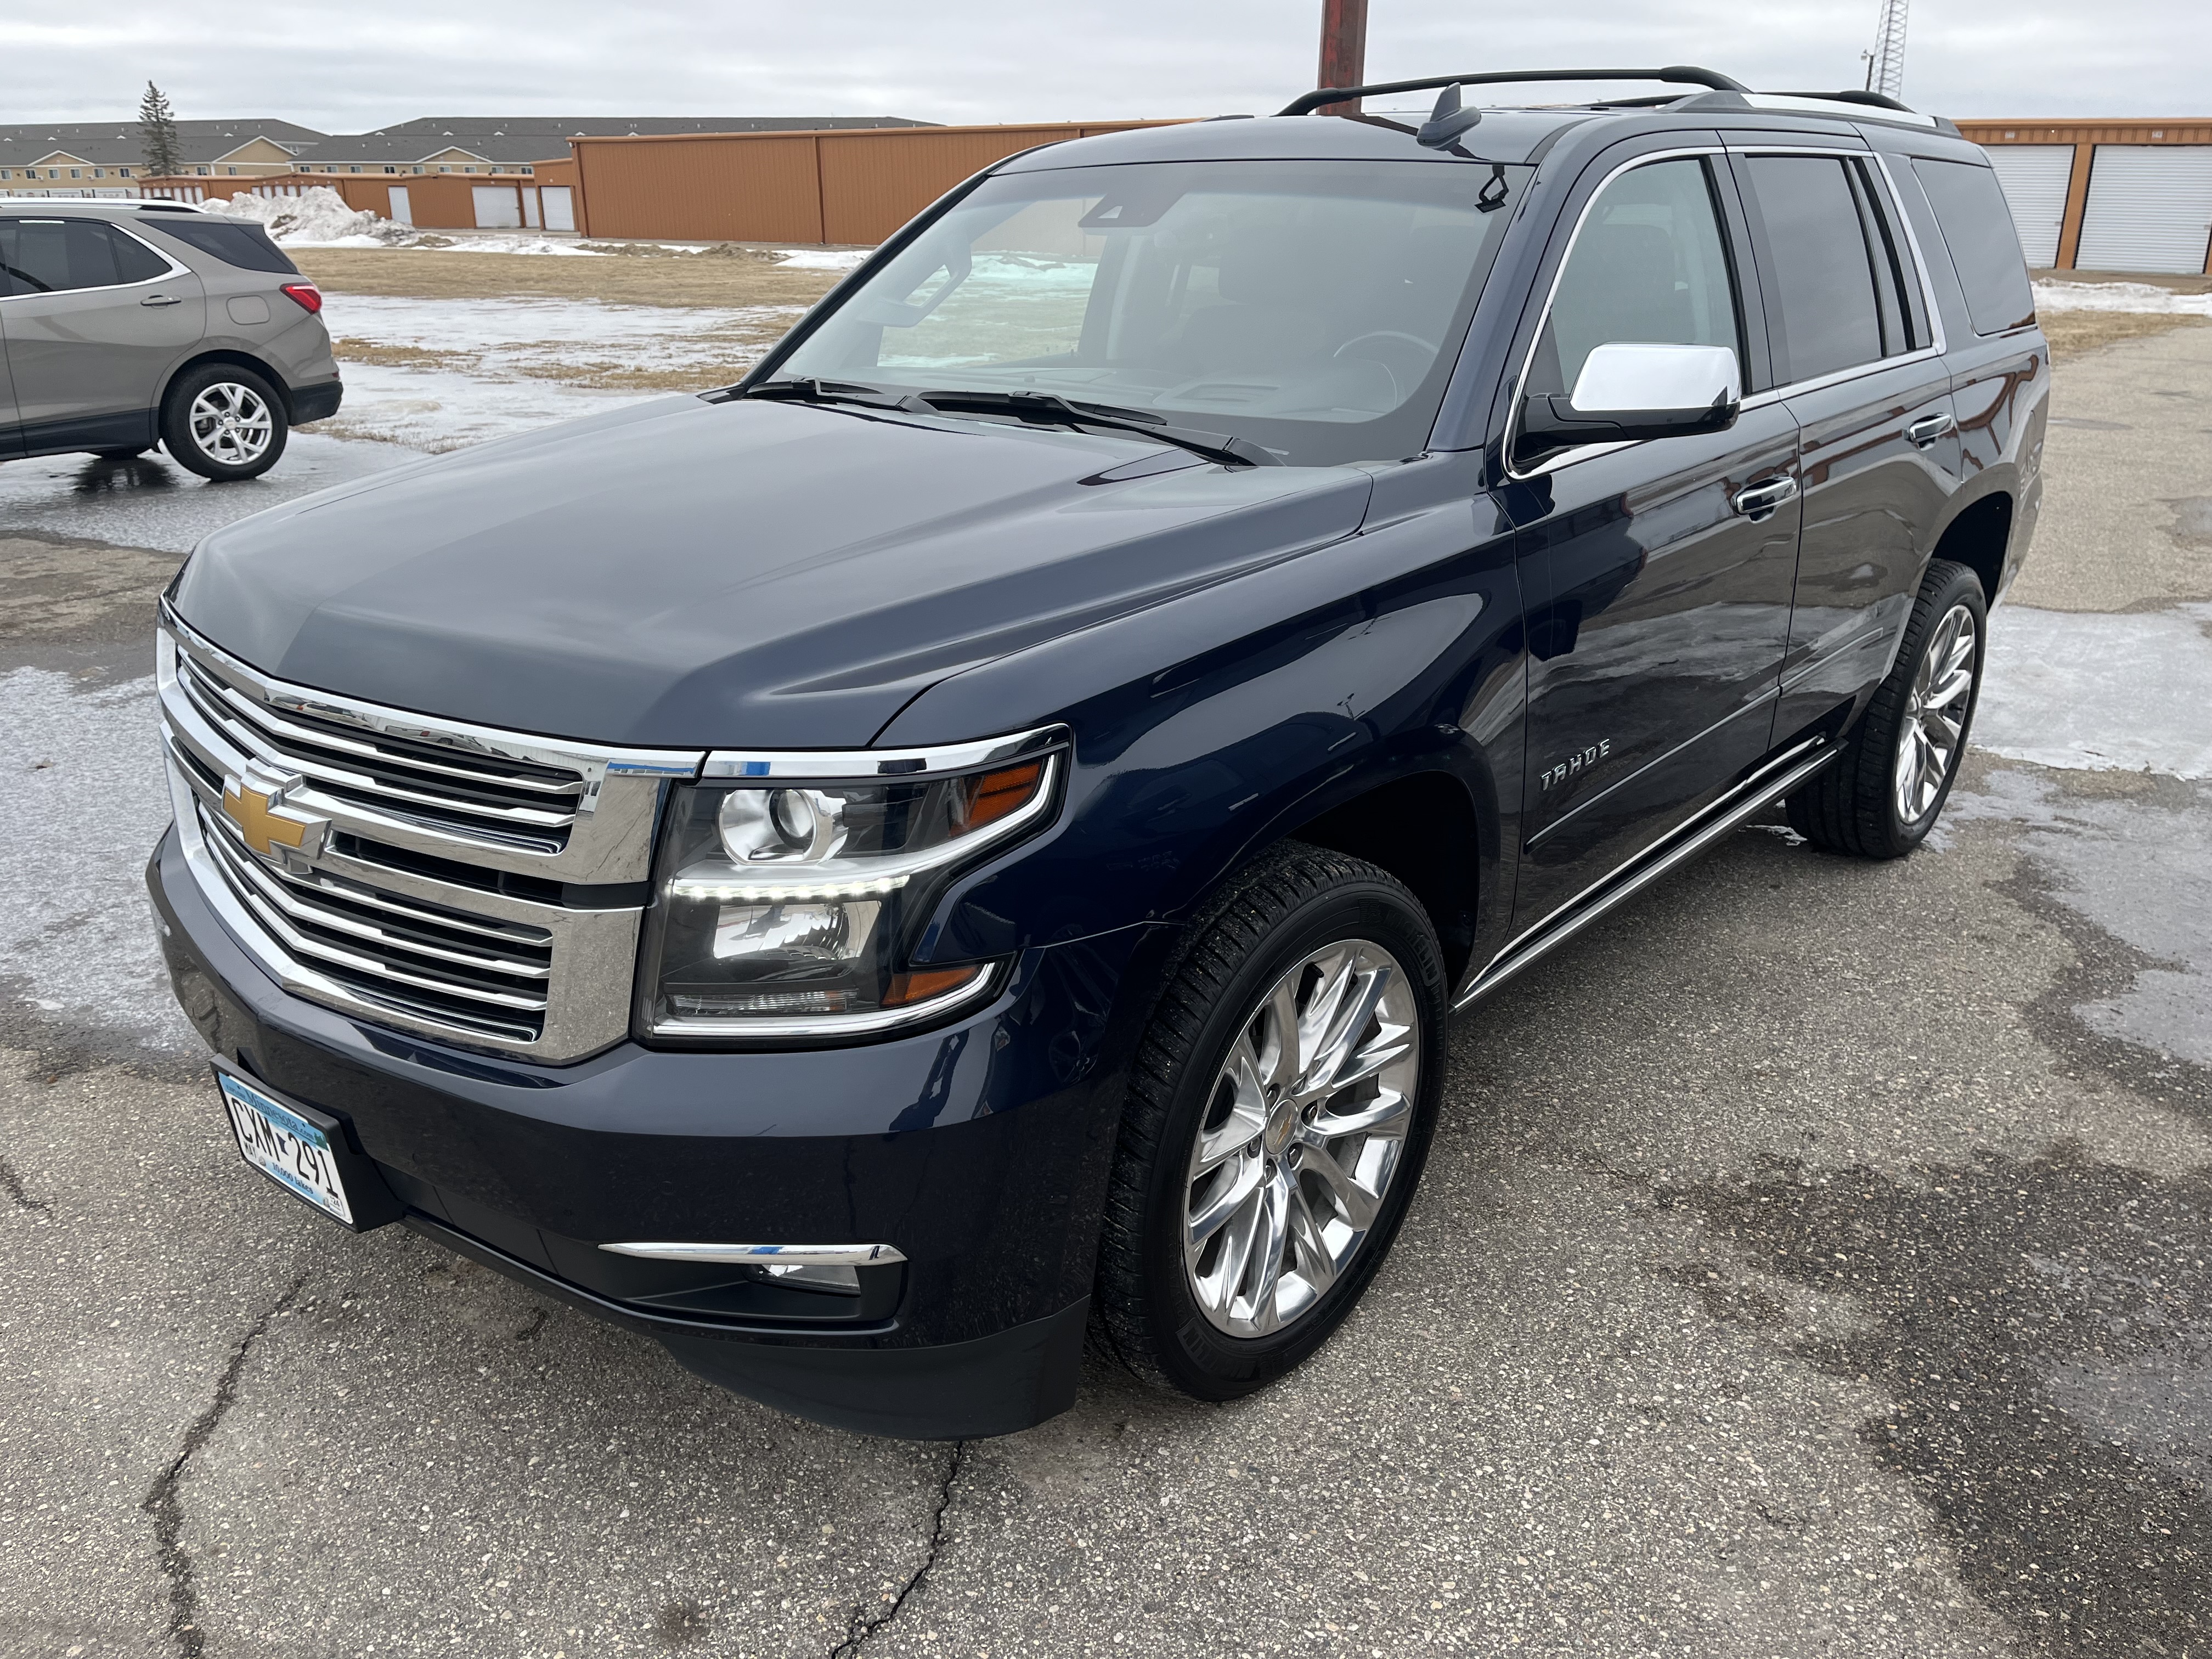 Used 2019 Chevrolet Tahoe Premier with VIN 1GNSKCKJ7KR278619 for sale in Thief River Falls, Minnesota